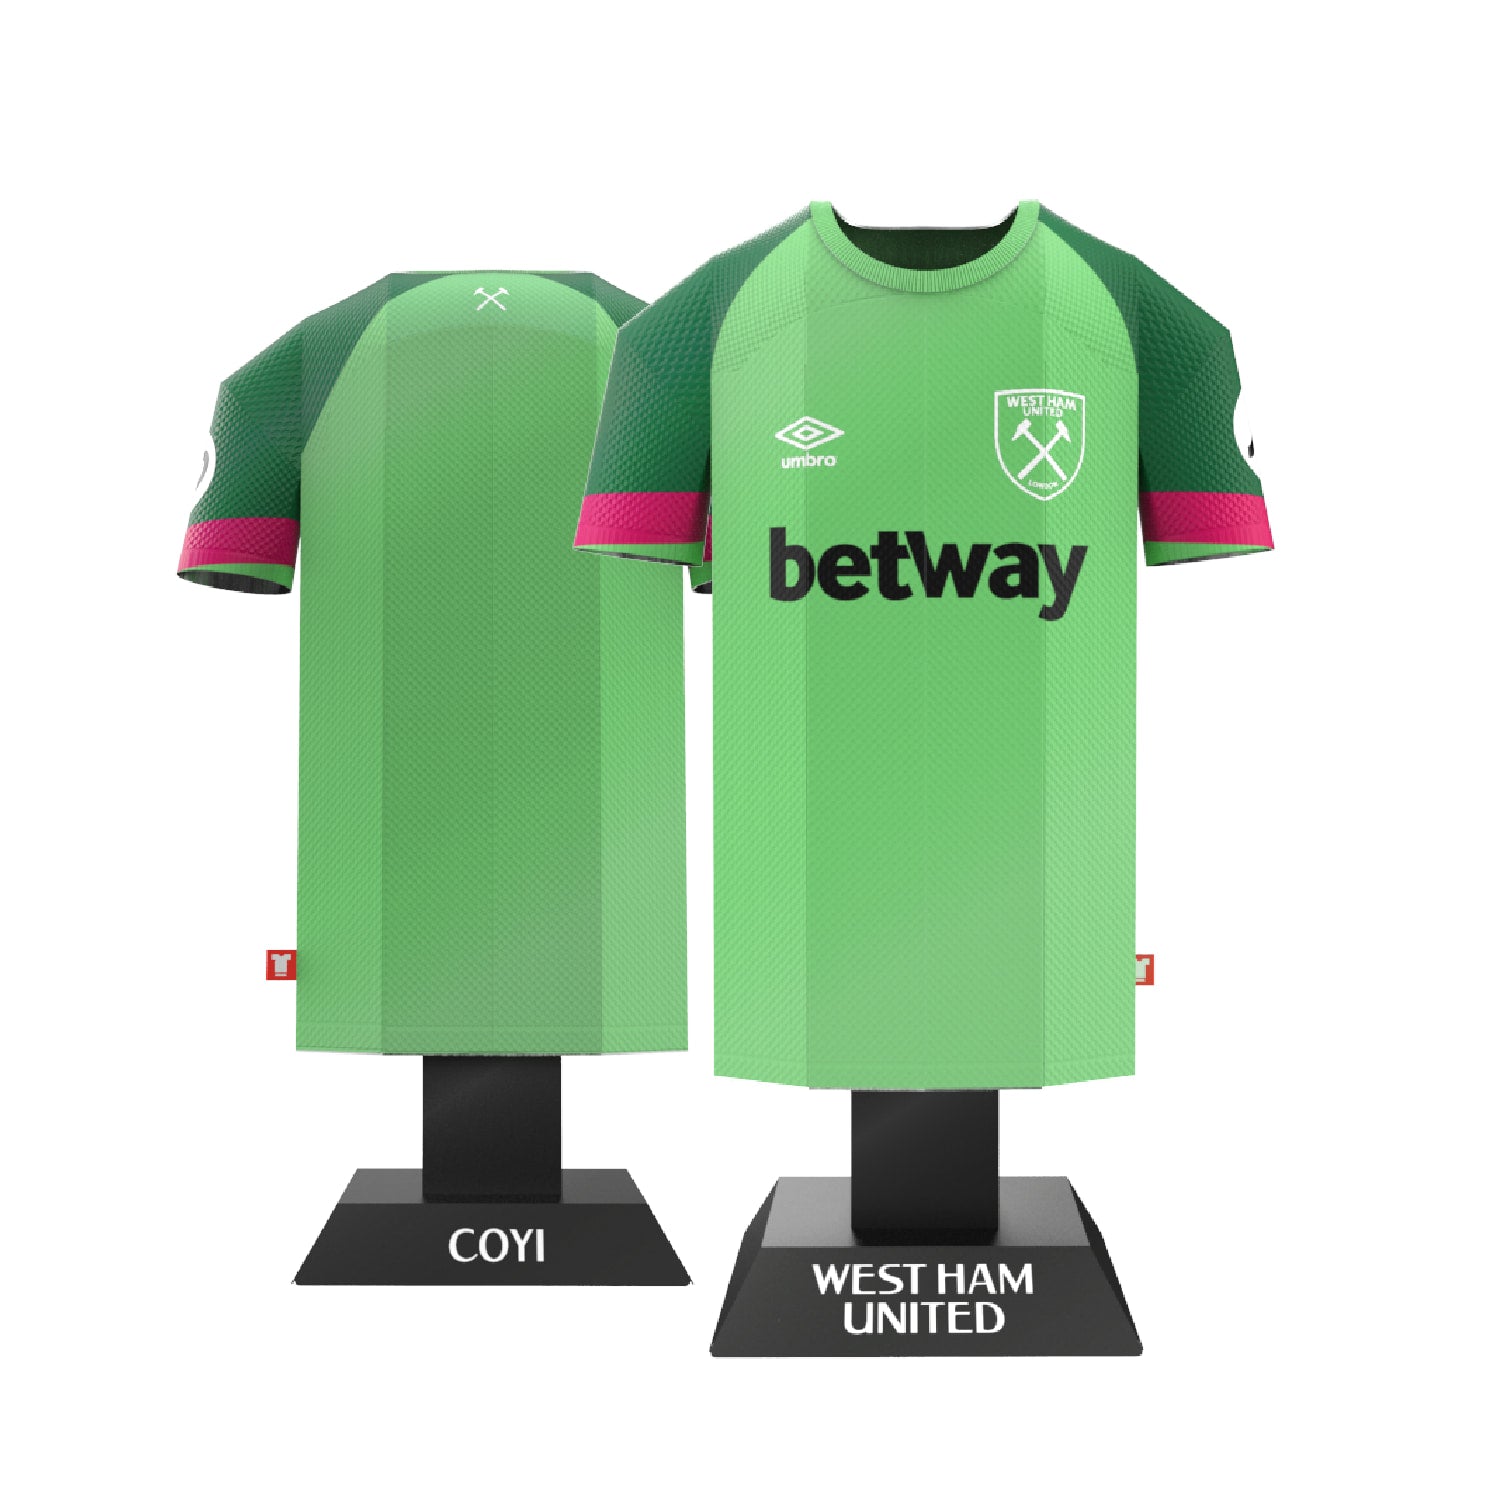 West ham goalkeeper shirt front and back view